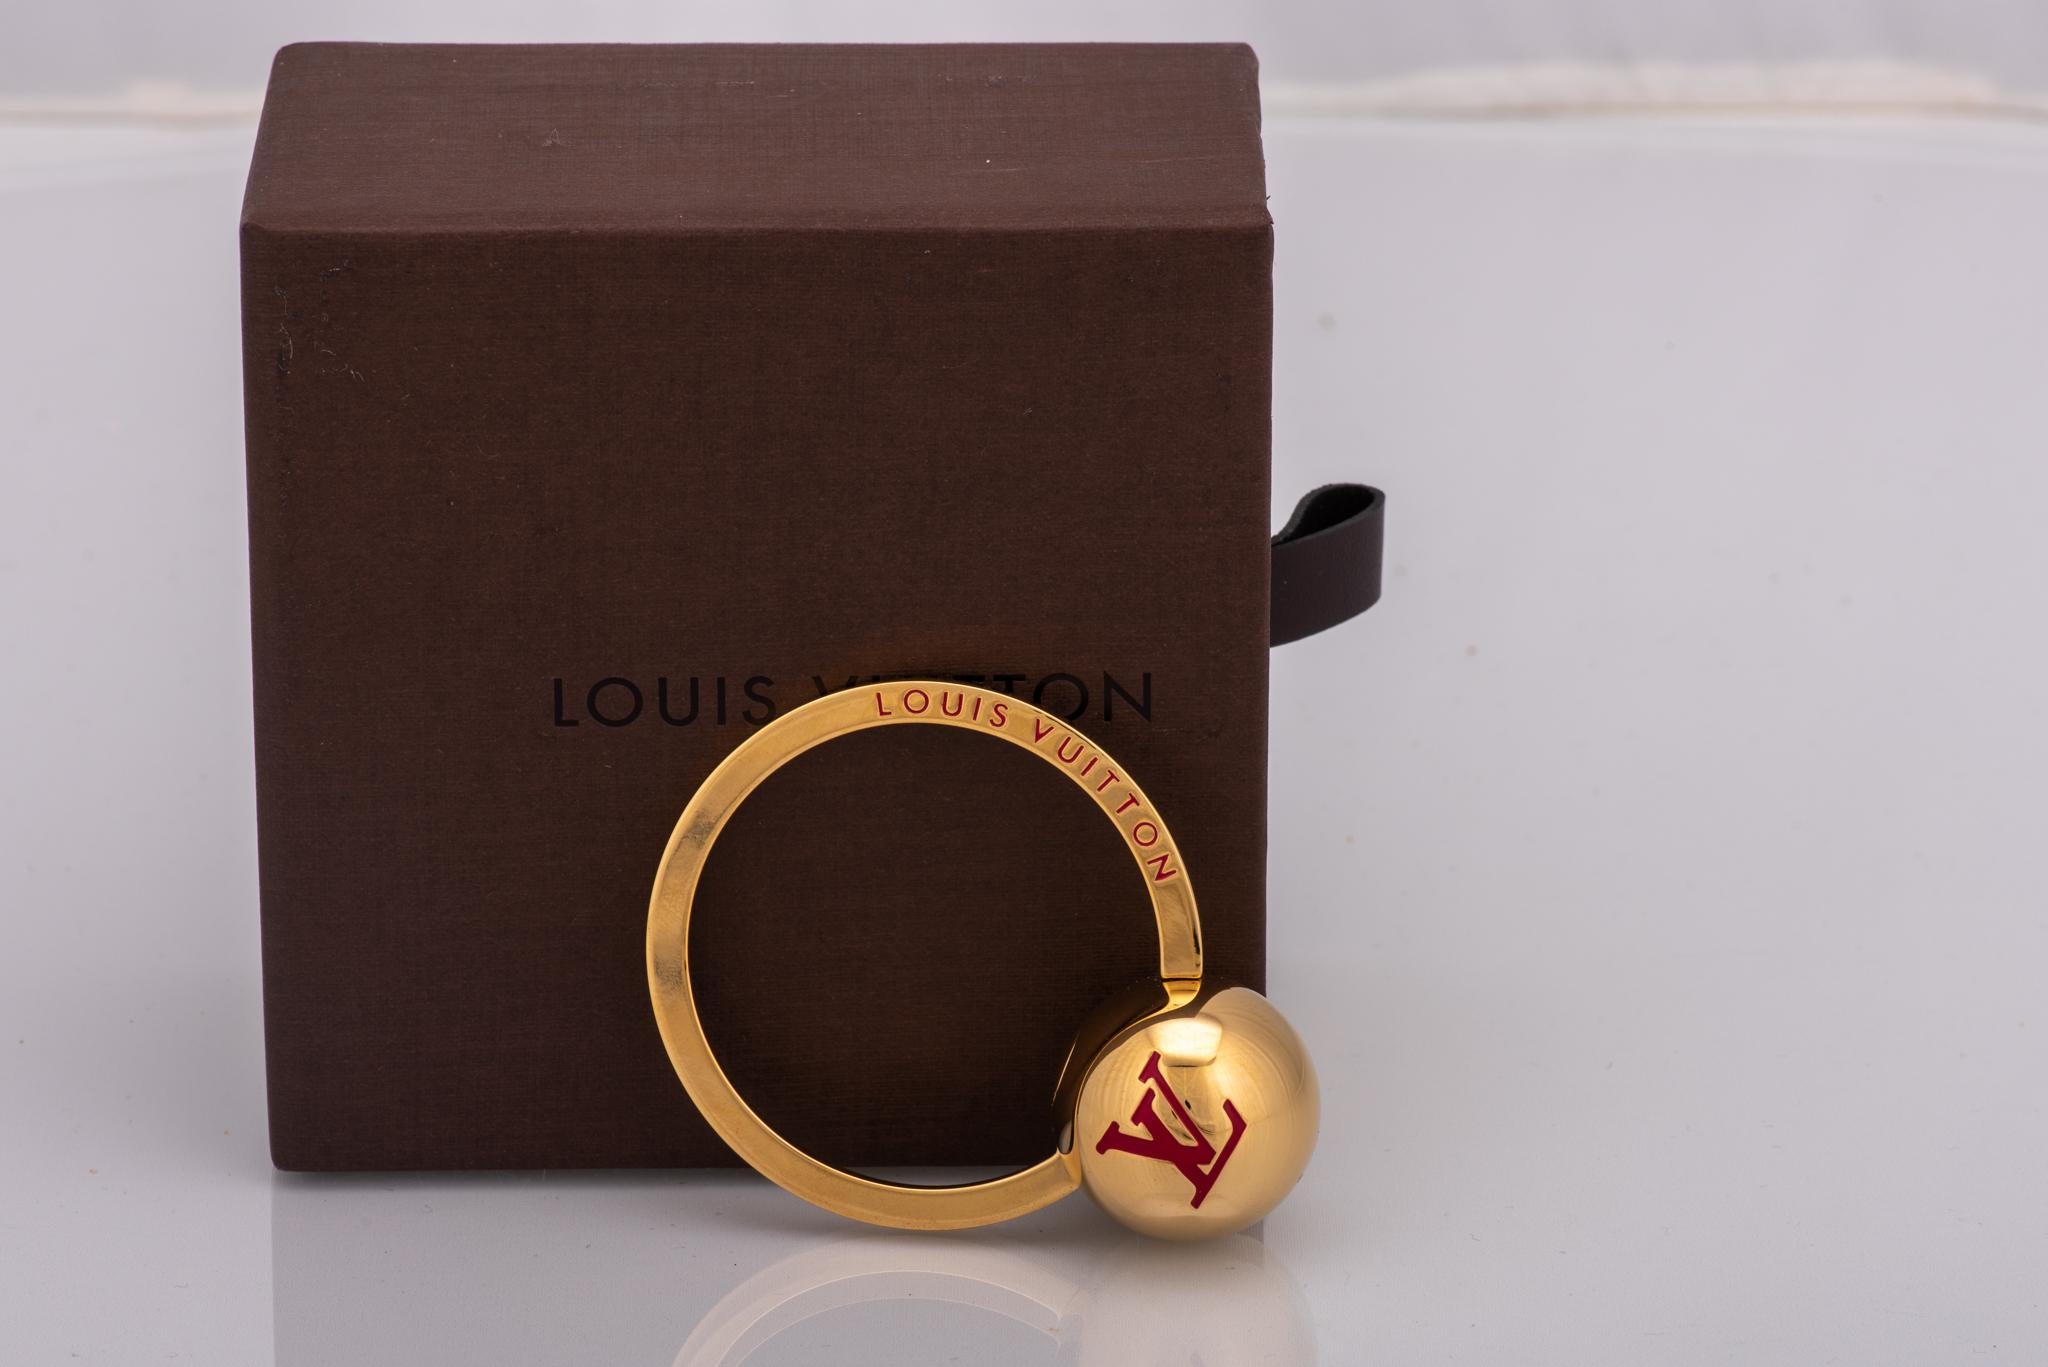 Louis Vuitton gold and enamel ring keychain. Brand new with original box and duster.